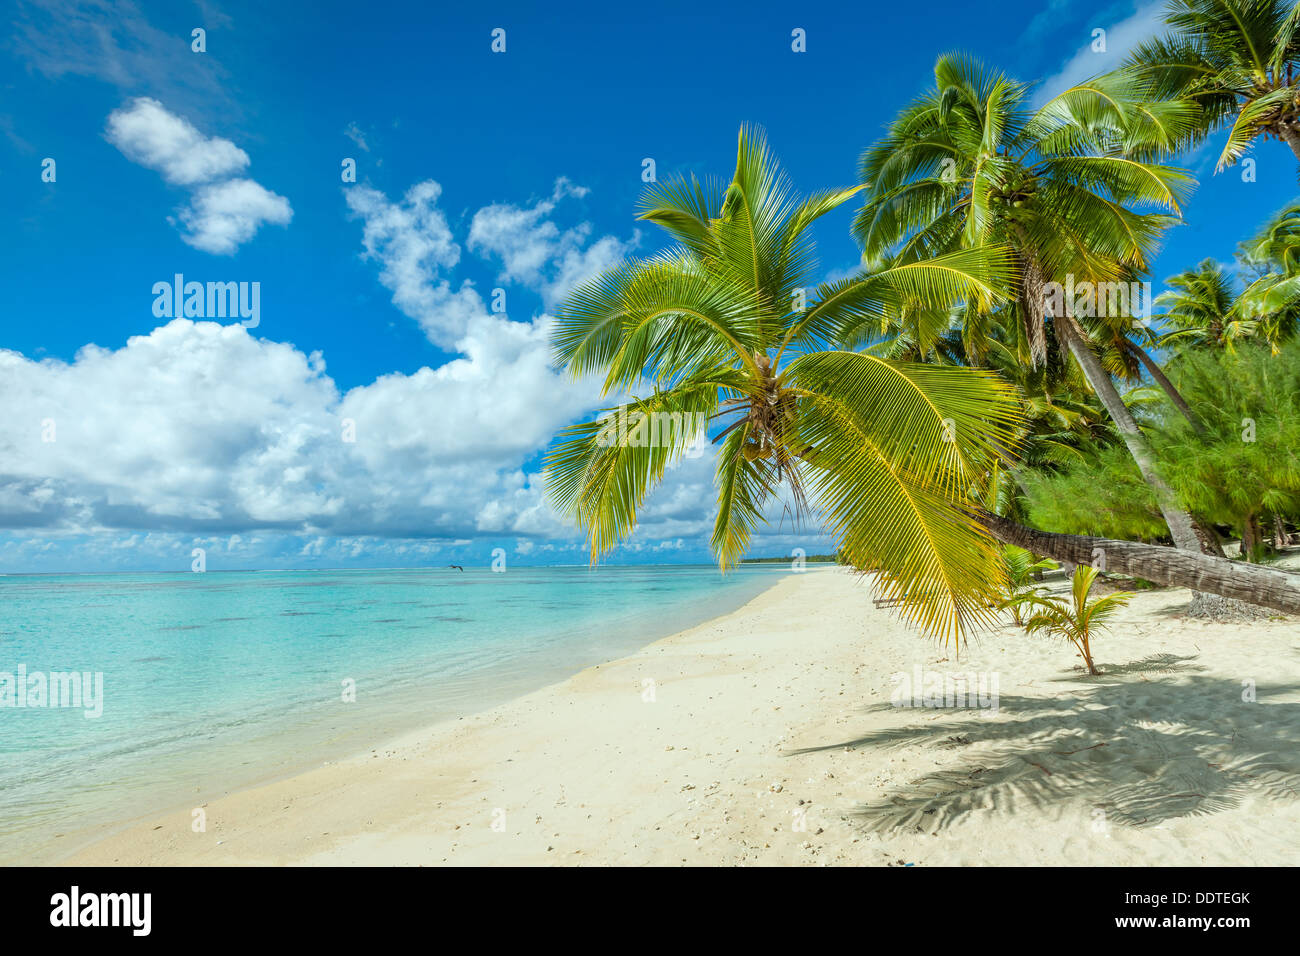 COOK ISLANDS, Aitutaki island, tropical sandy white beach with turquoise water and palm trees - Amuri beach, South Pacific Stock Photo